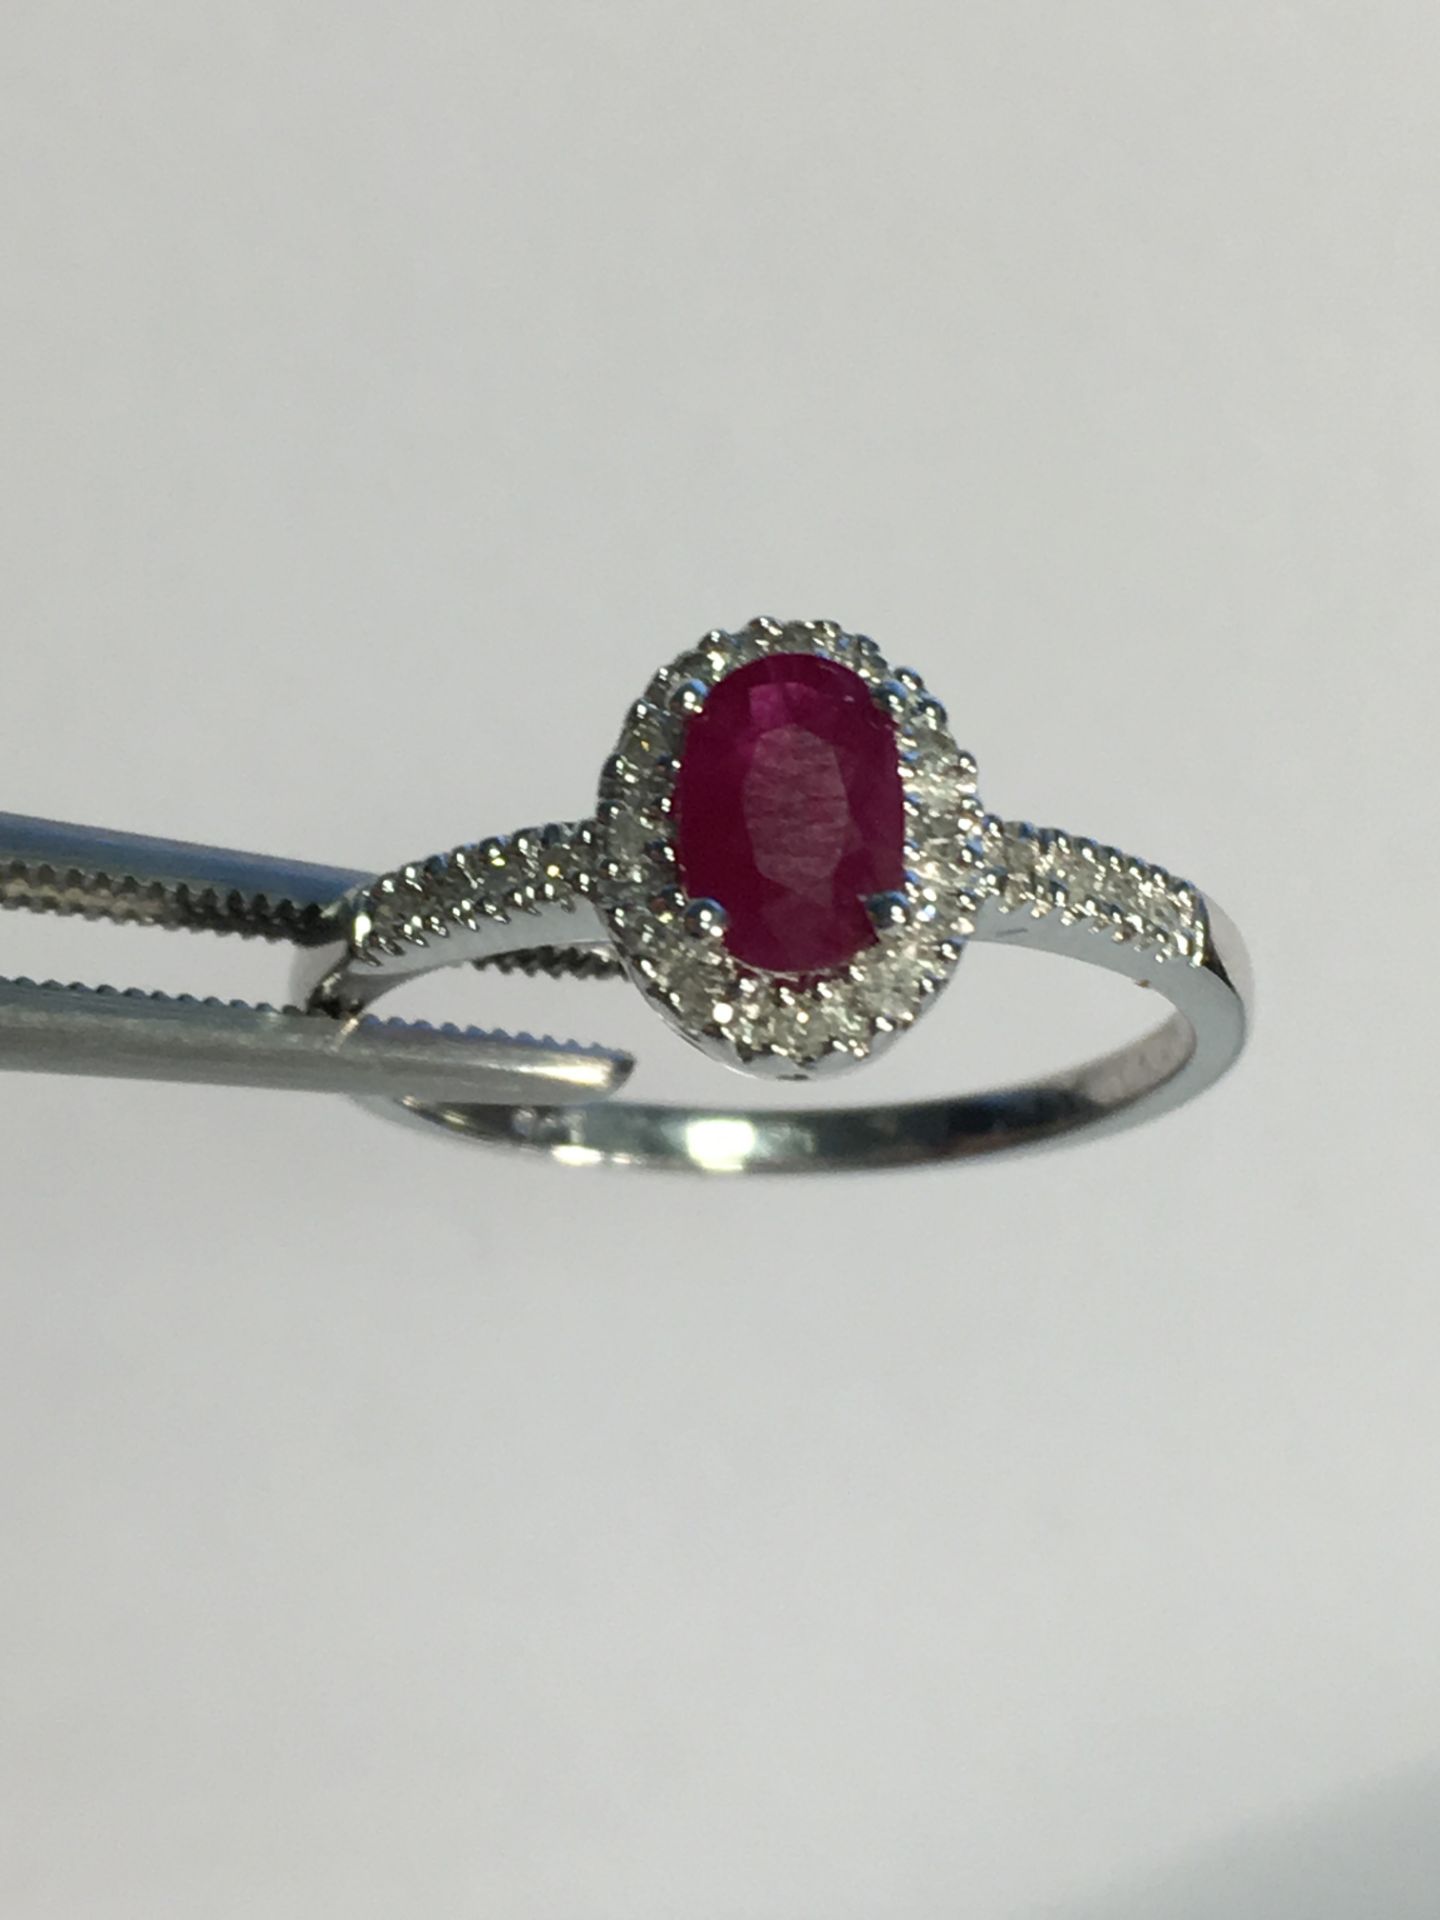 9k White gold ladies ring set with an oval Ruby and diamond surround - Image 3 of 3